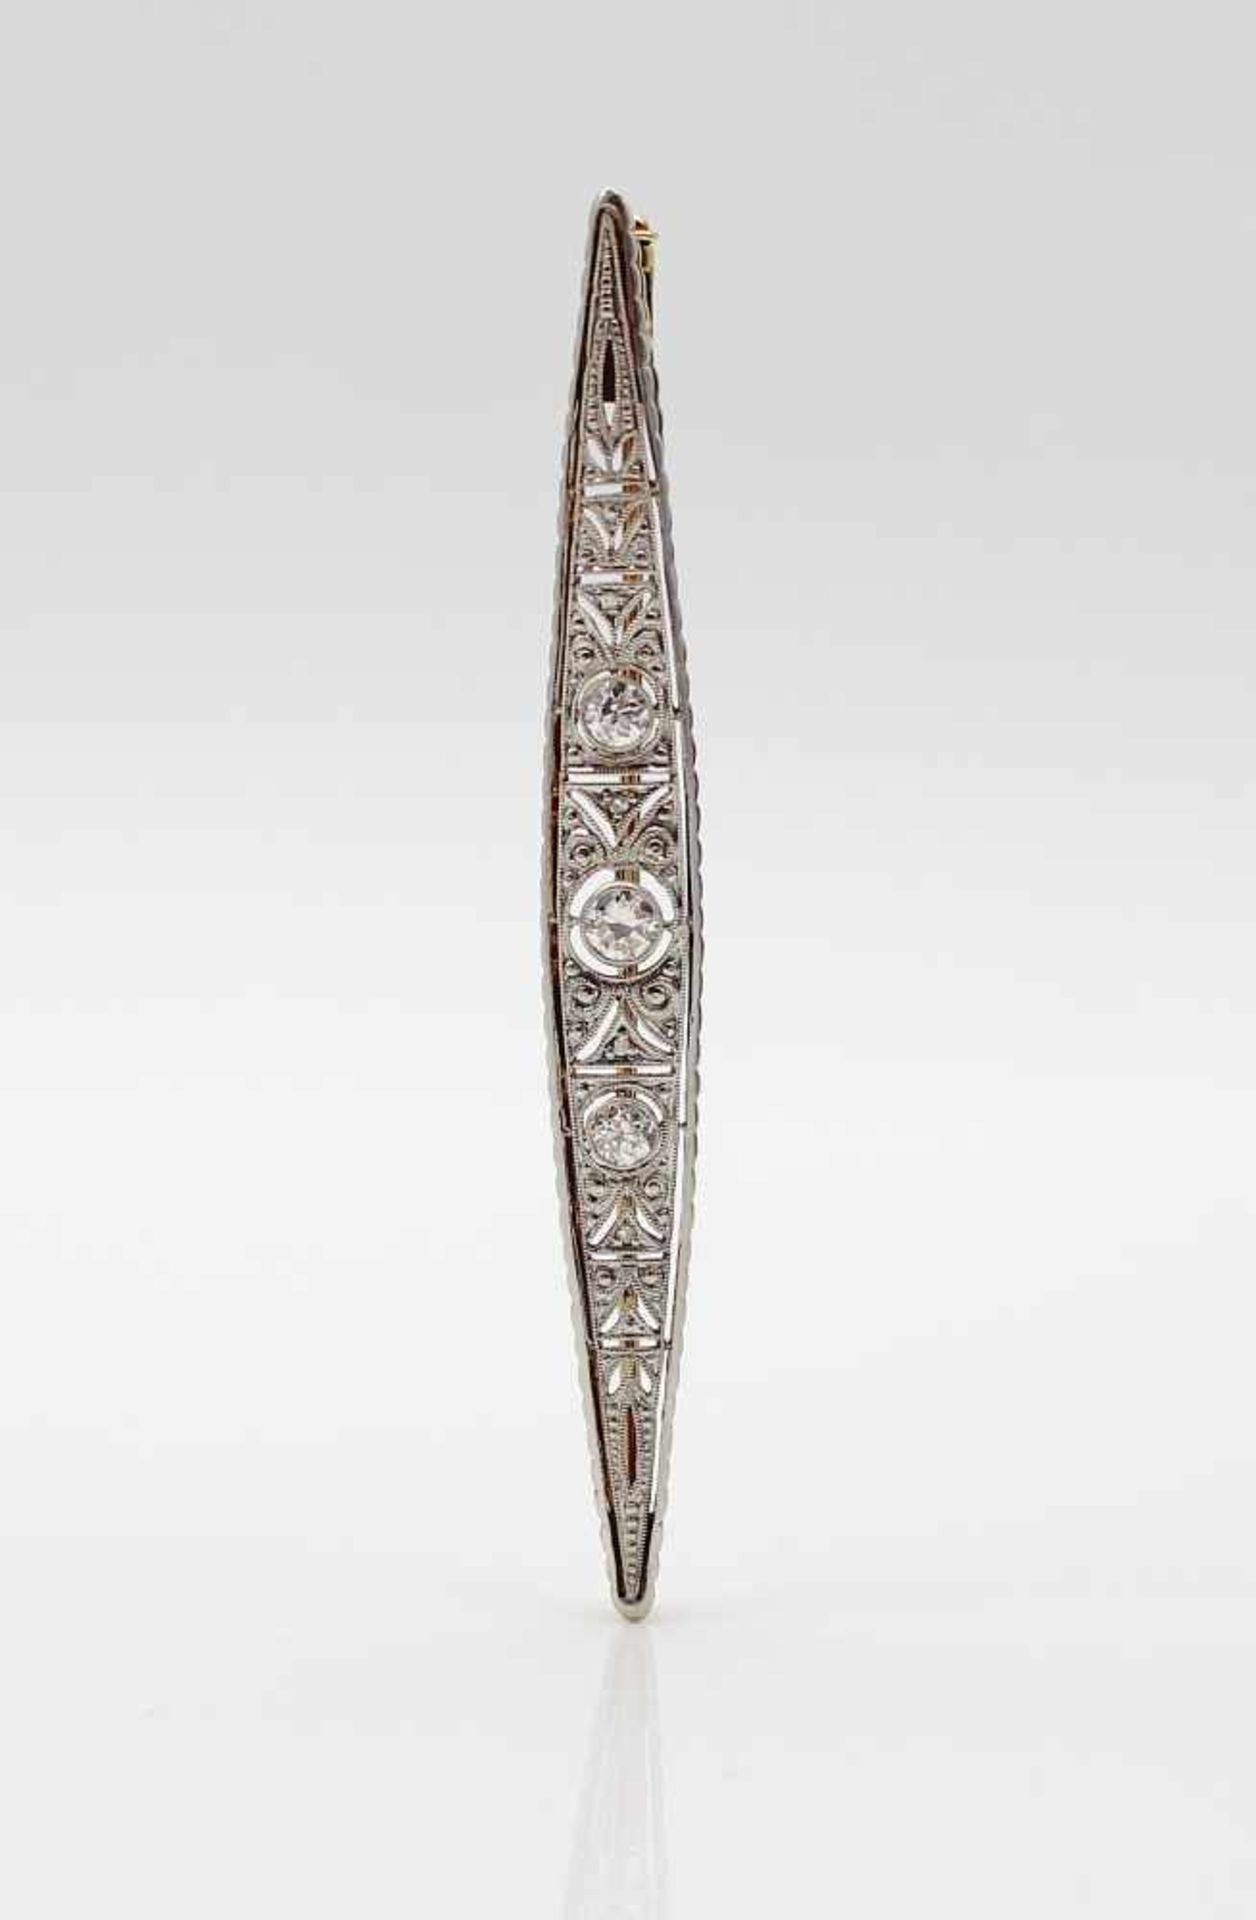 Art Deco brooch tested on 585 gold and platinum with 3 diamonds in old/transitional cut, 1 x 0.16 ct - Bild 3 aus 3